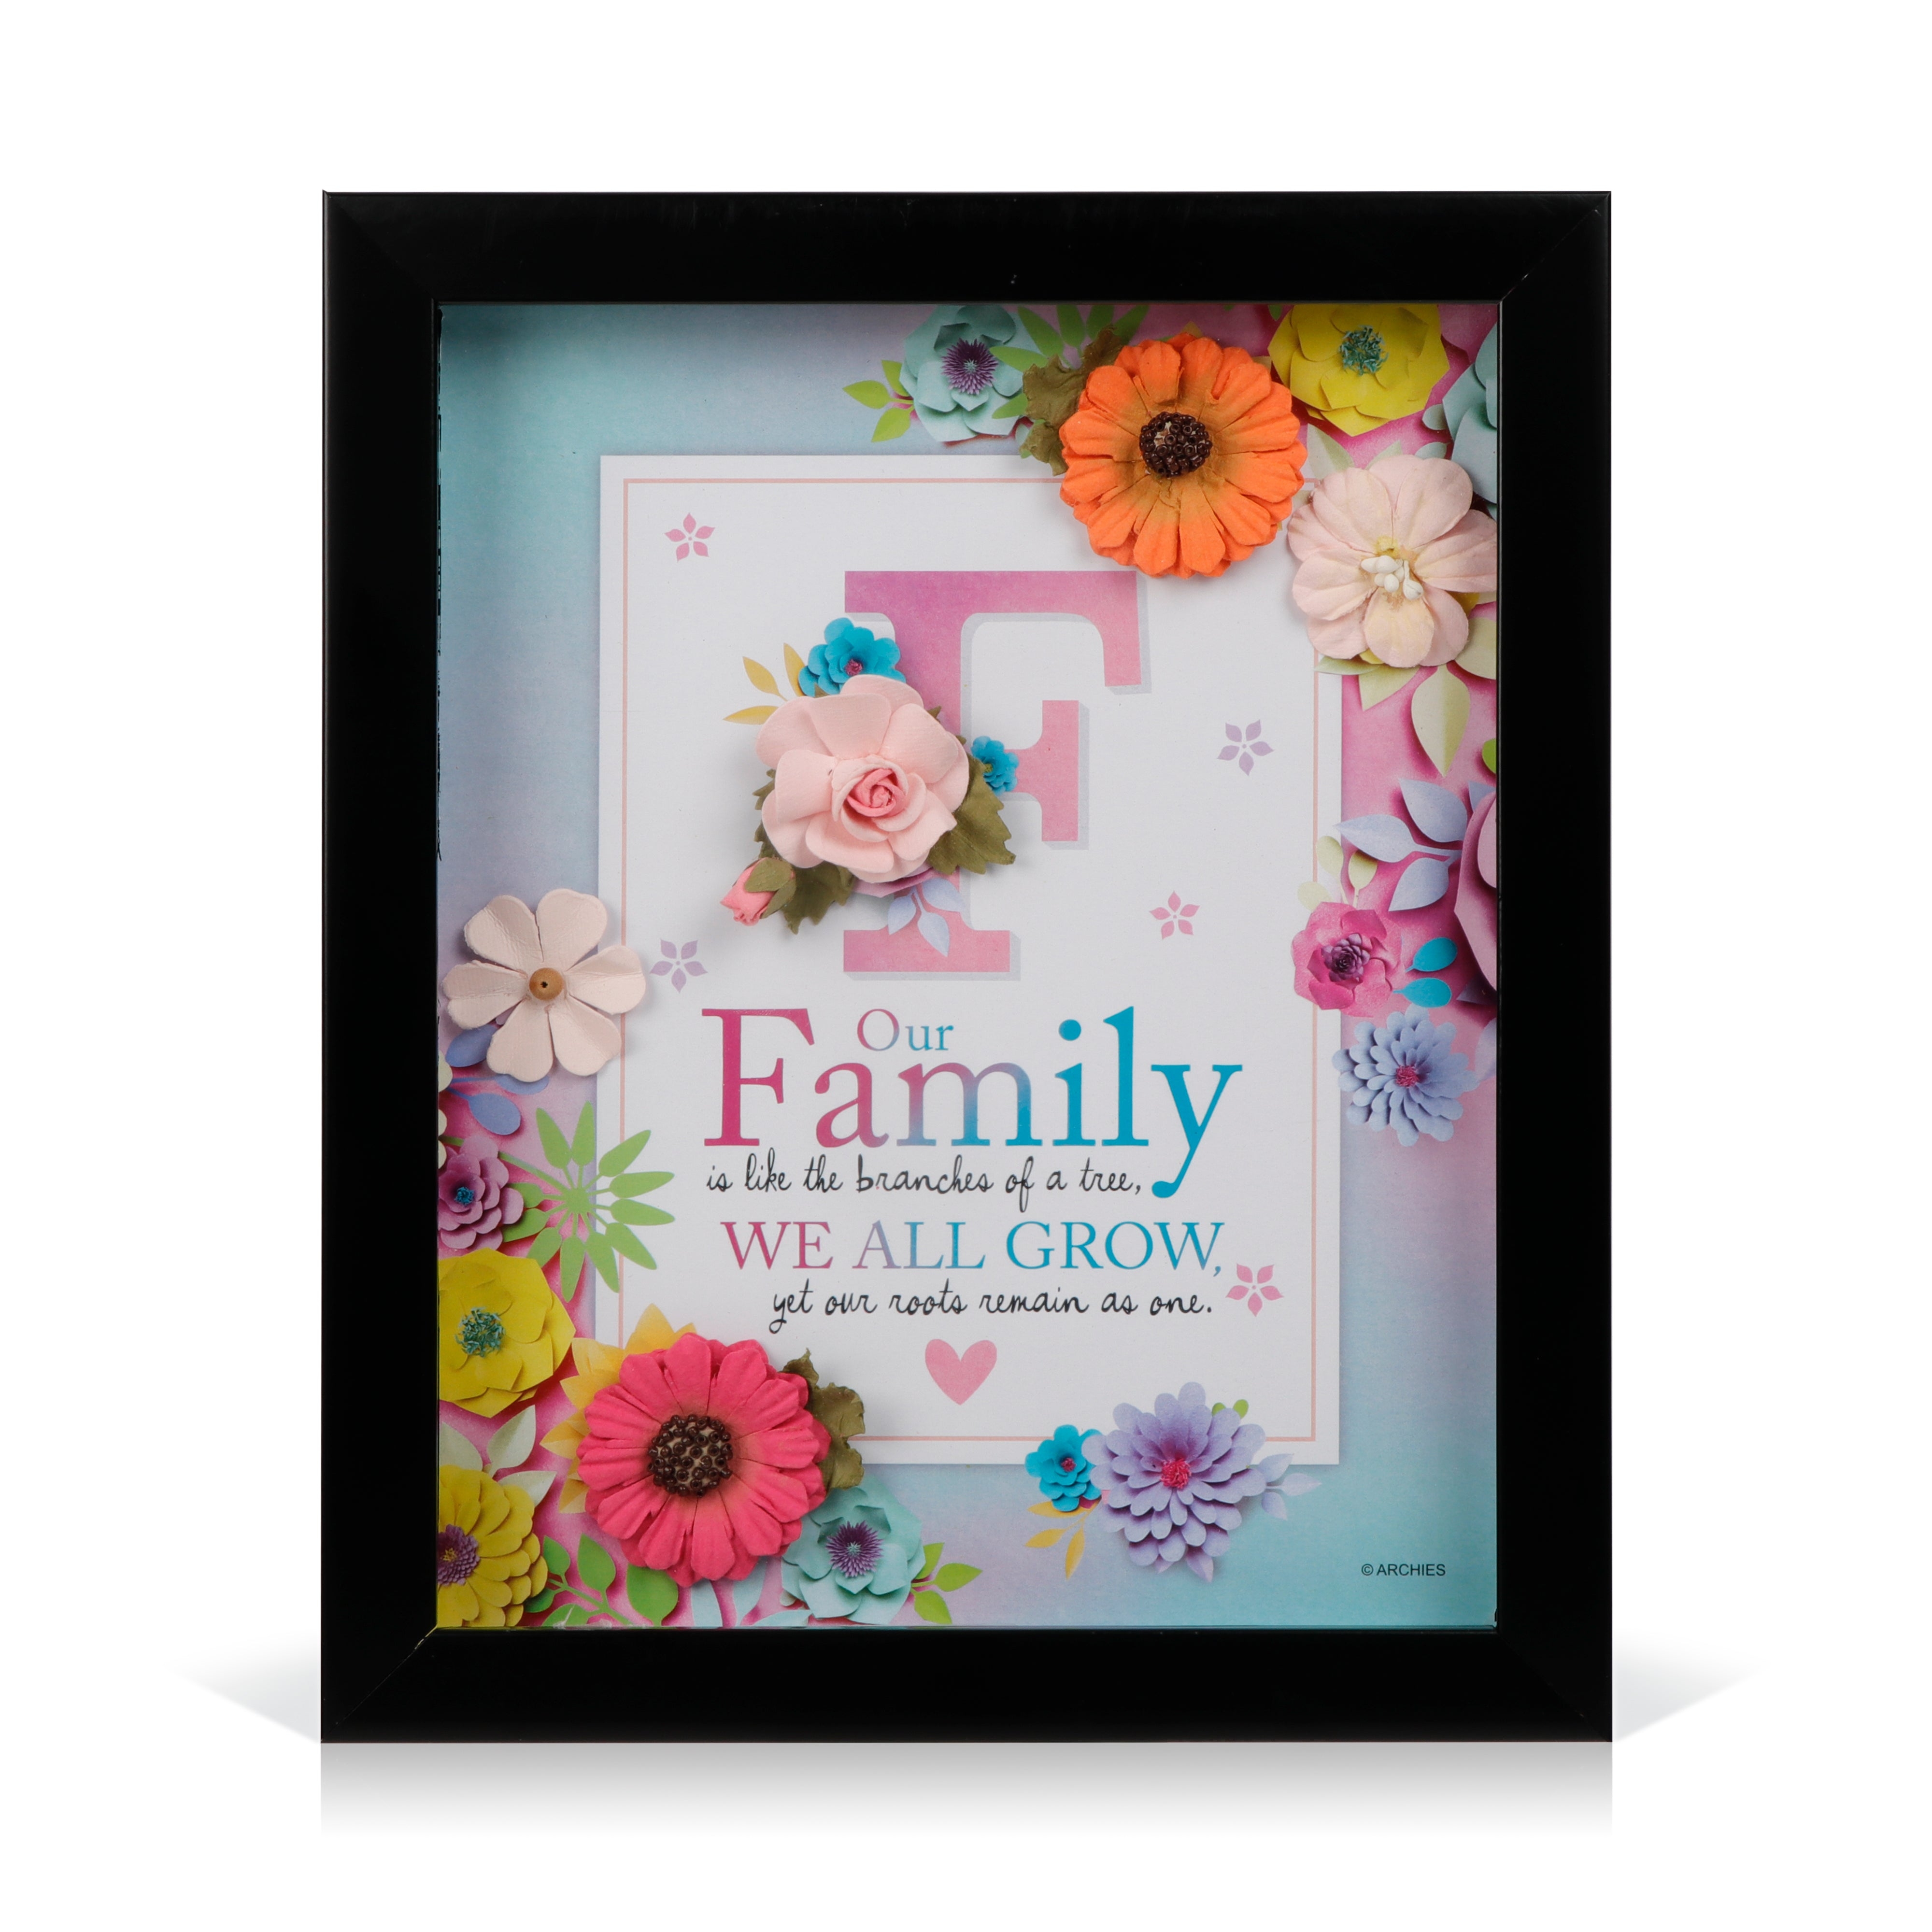 Archies | Archies KEEPSAKE QUOTATION - F.OUR FAMILY IS .... For gifting and Home décor 0